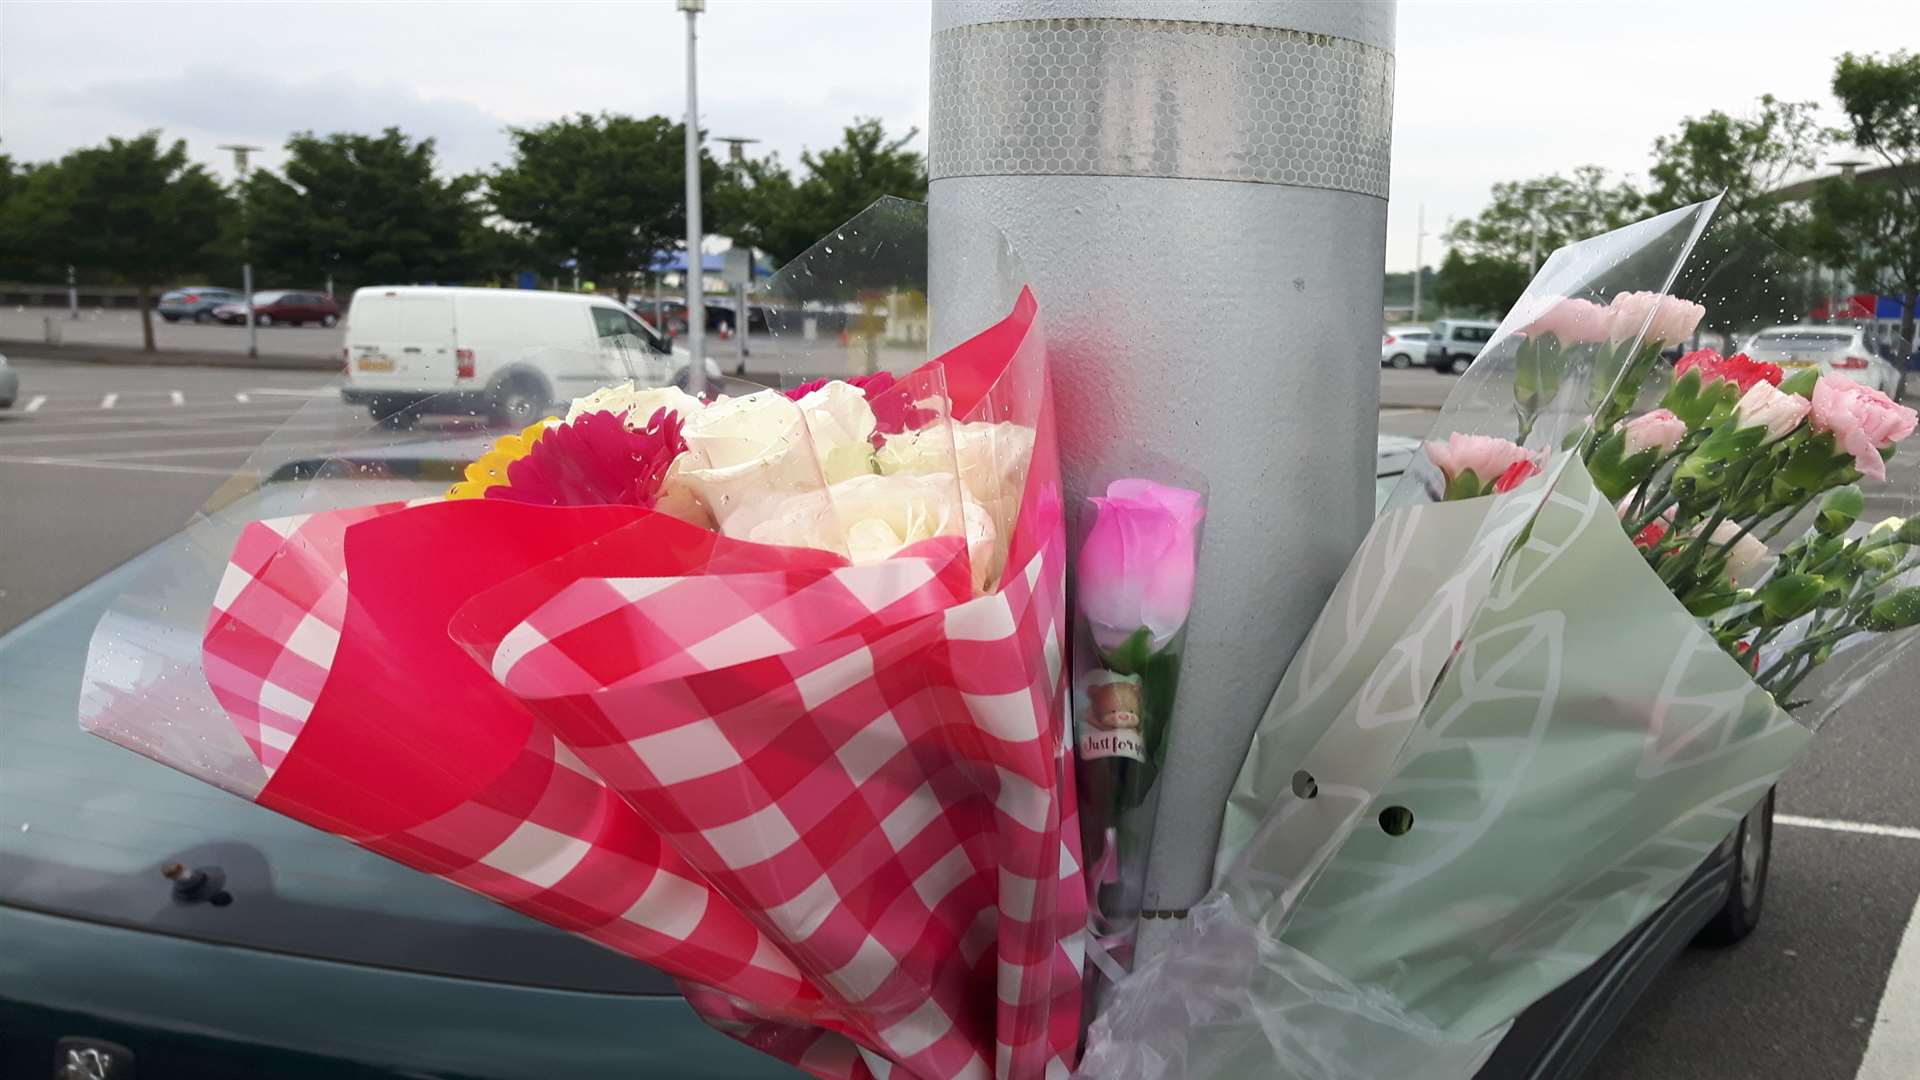 Flowers have been left at the scene of the Dockside Outlet death